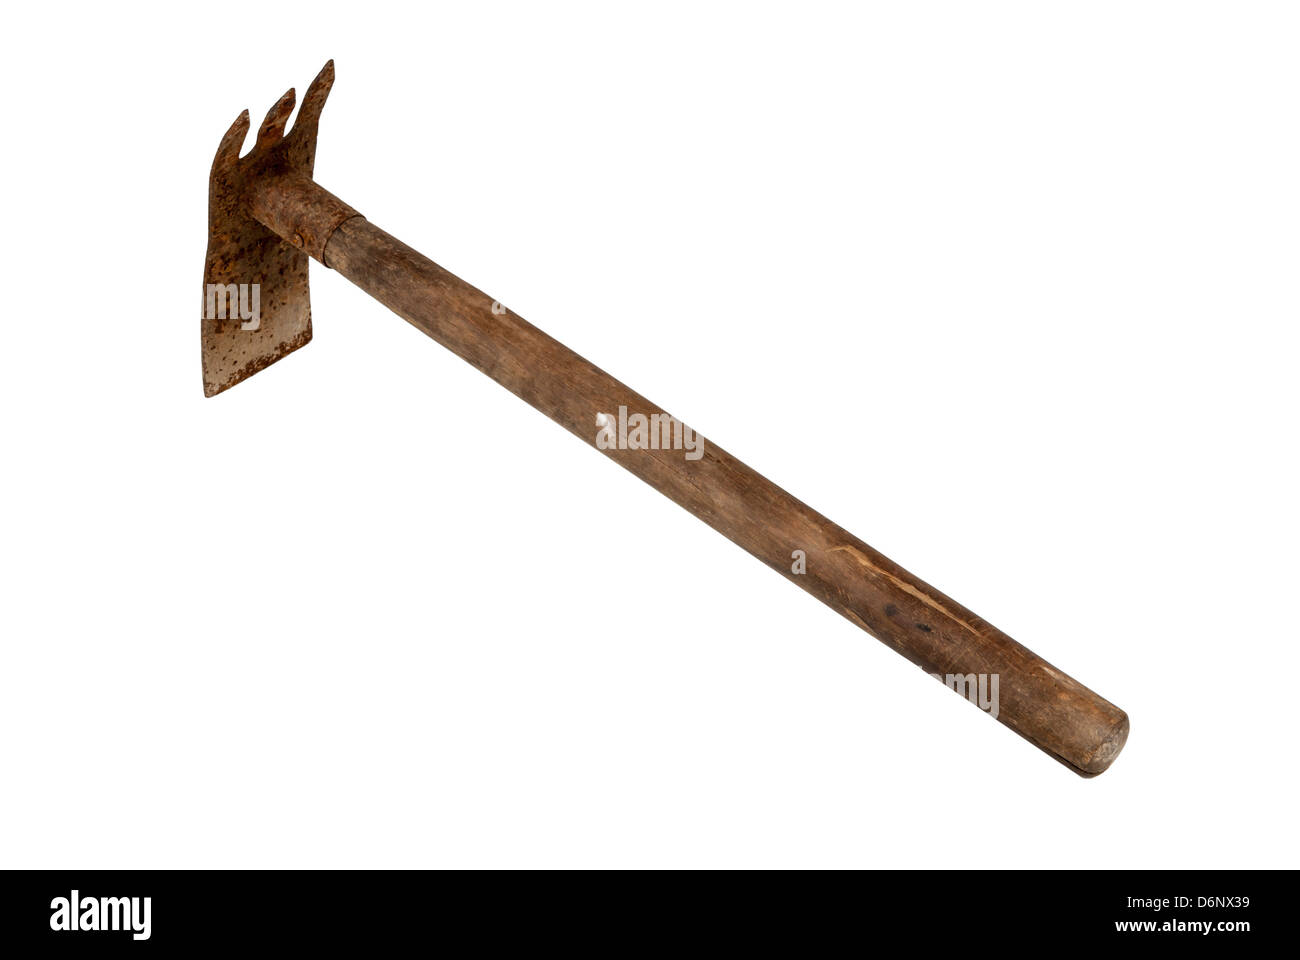 Ancient Hoe, Isolated Stock Photo